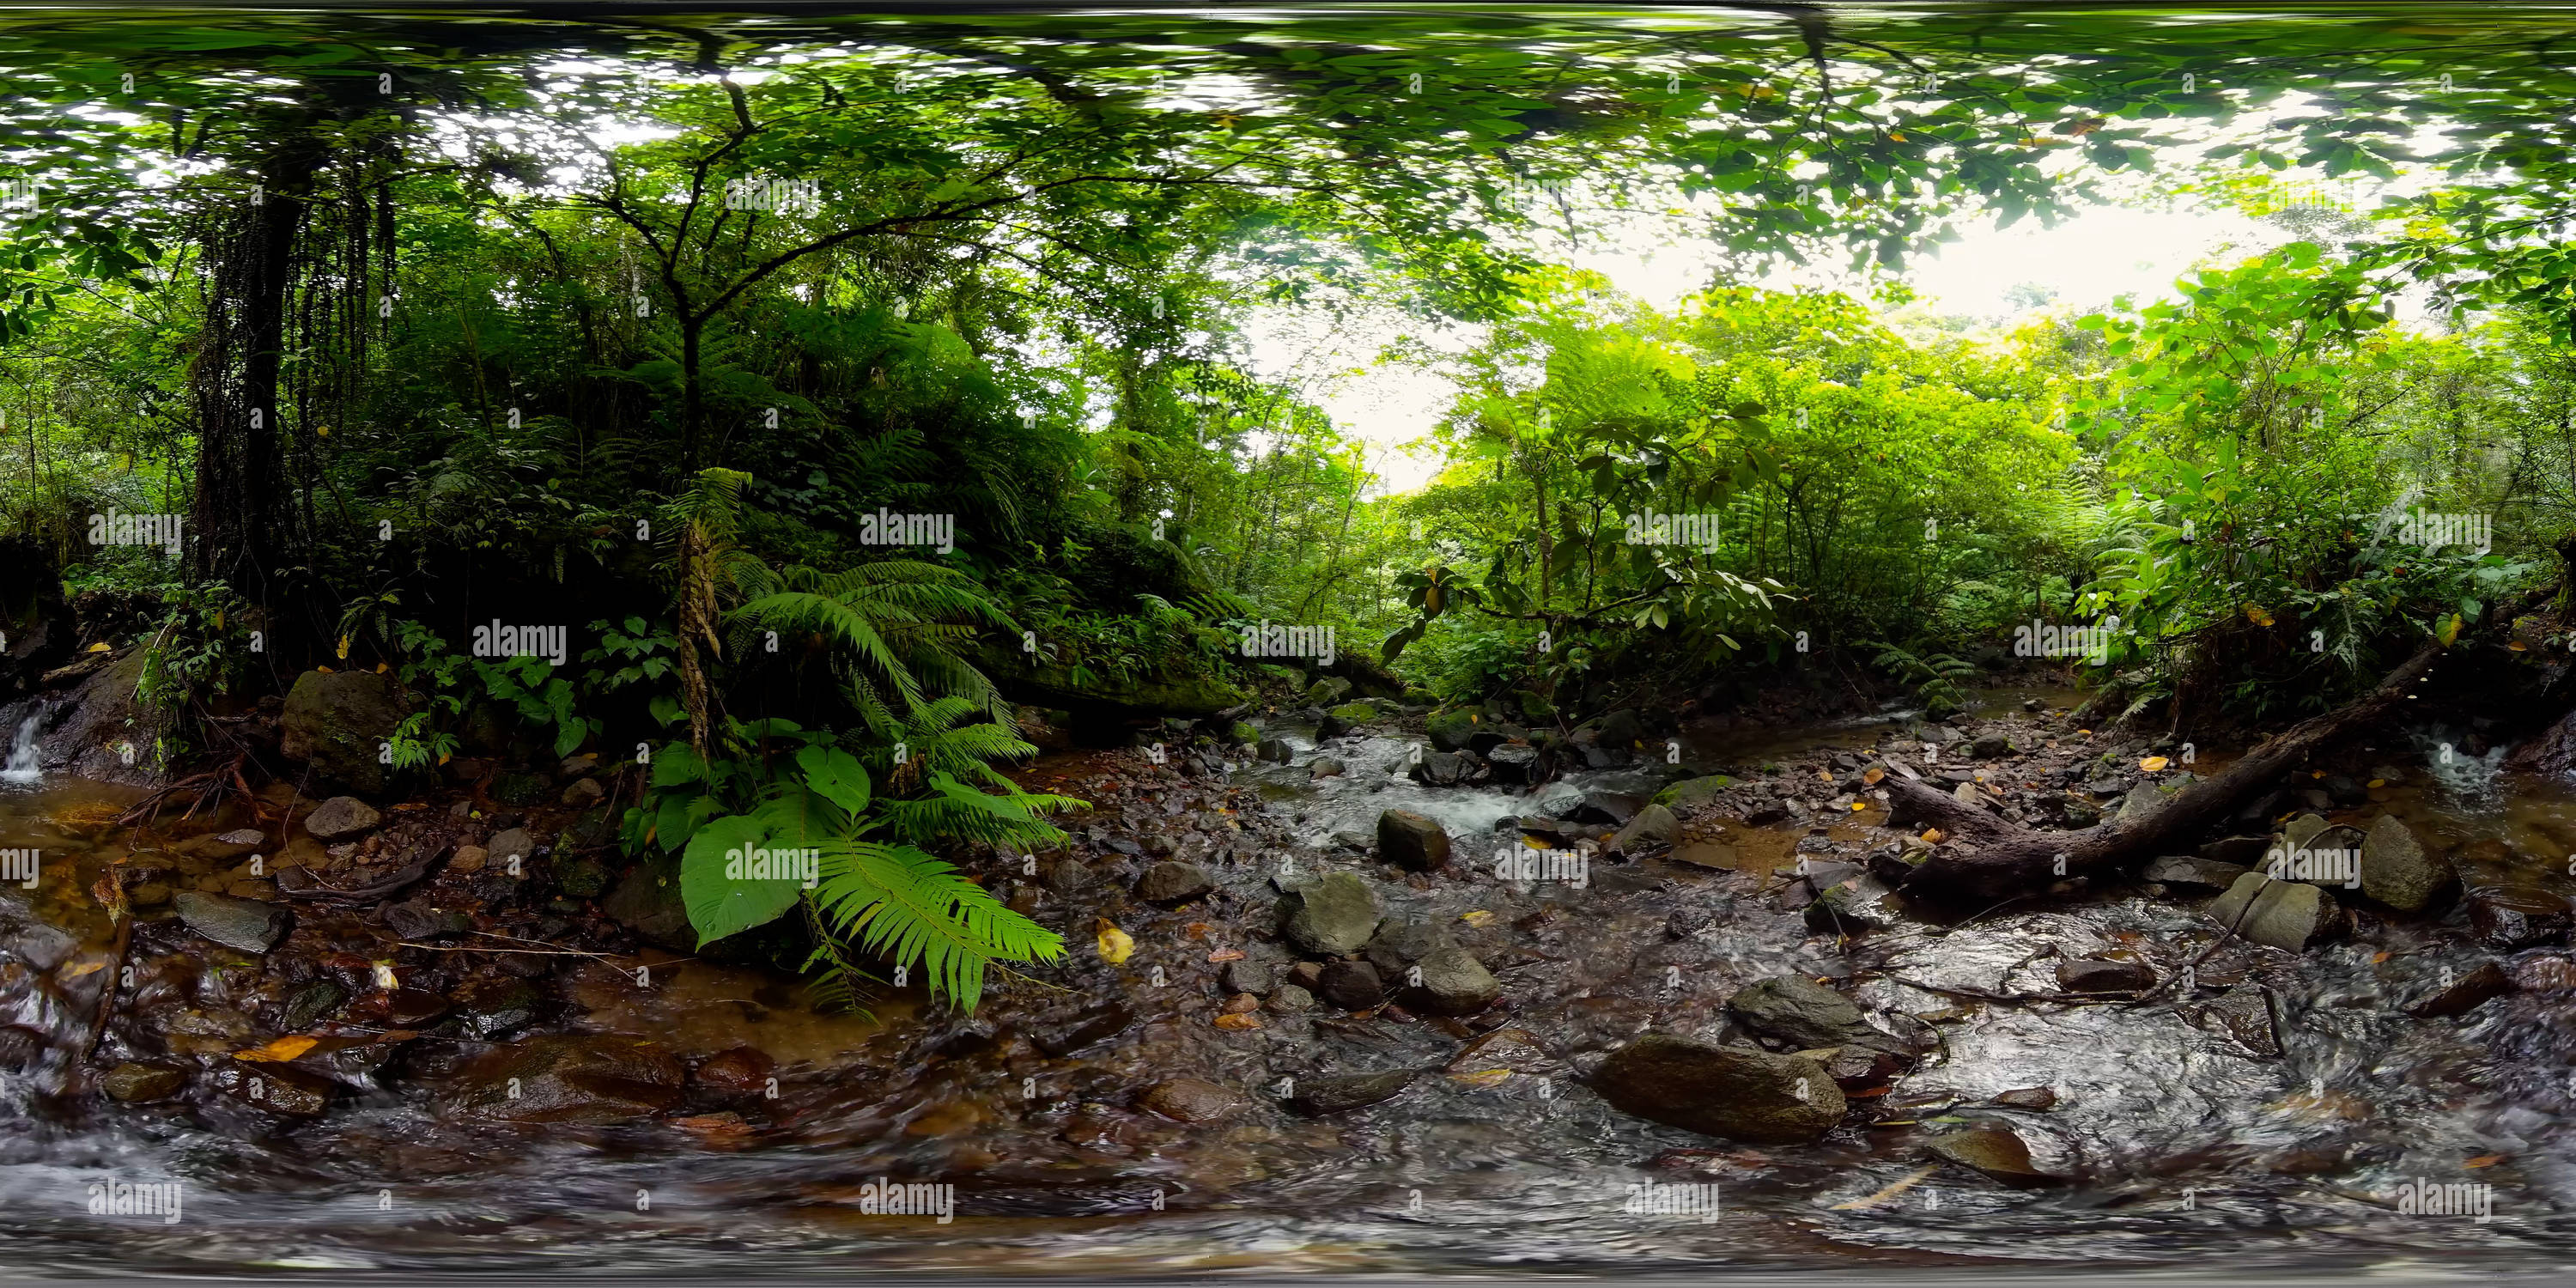 360 degree panoramic view of River in the jungle among tropical vegetation.